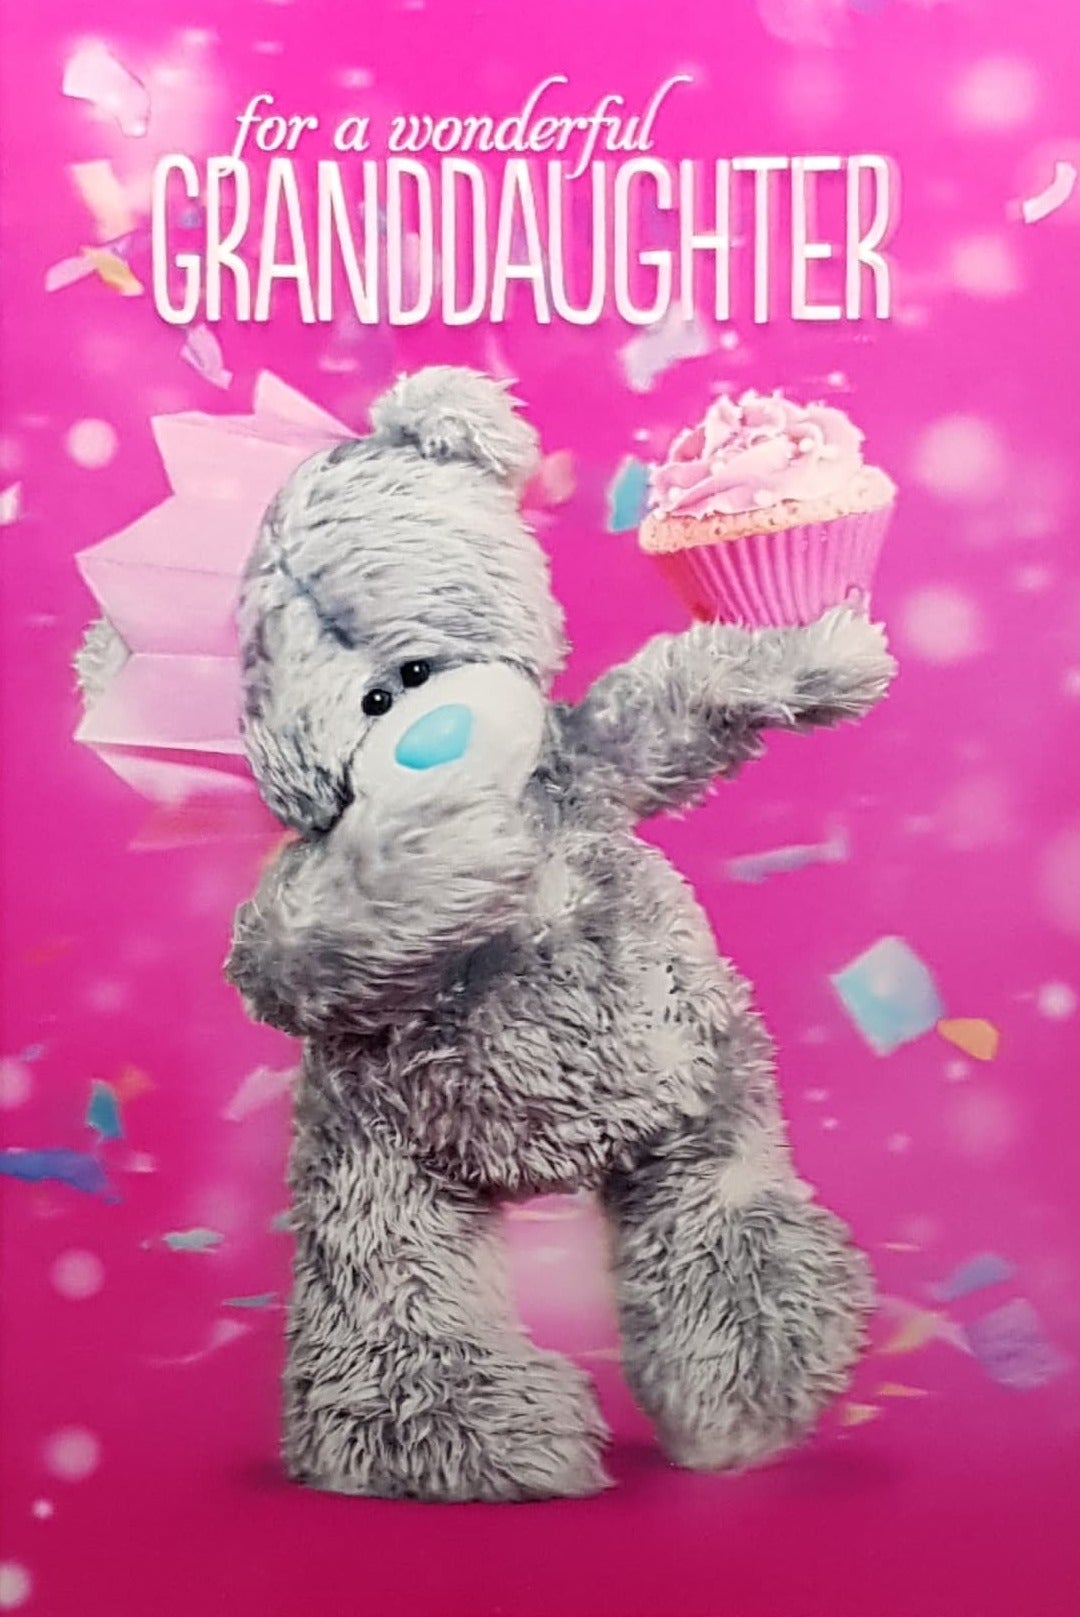 Birthday Card - Granddaughter / Fluffy Teddy In Pink Hat Holding Out A Cupcake (3D Card)